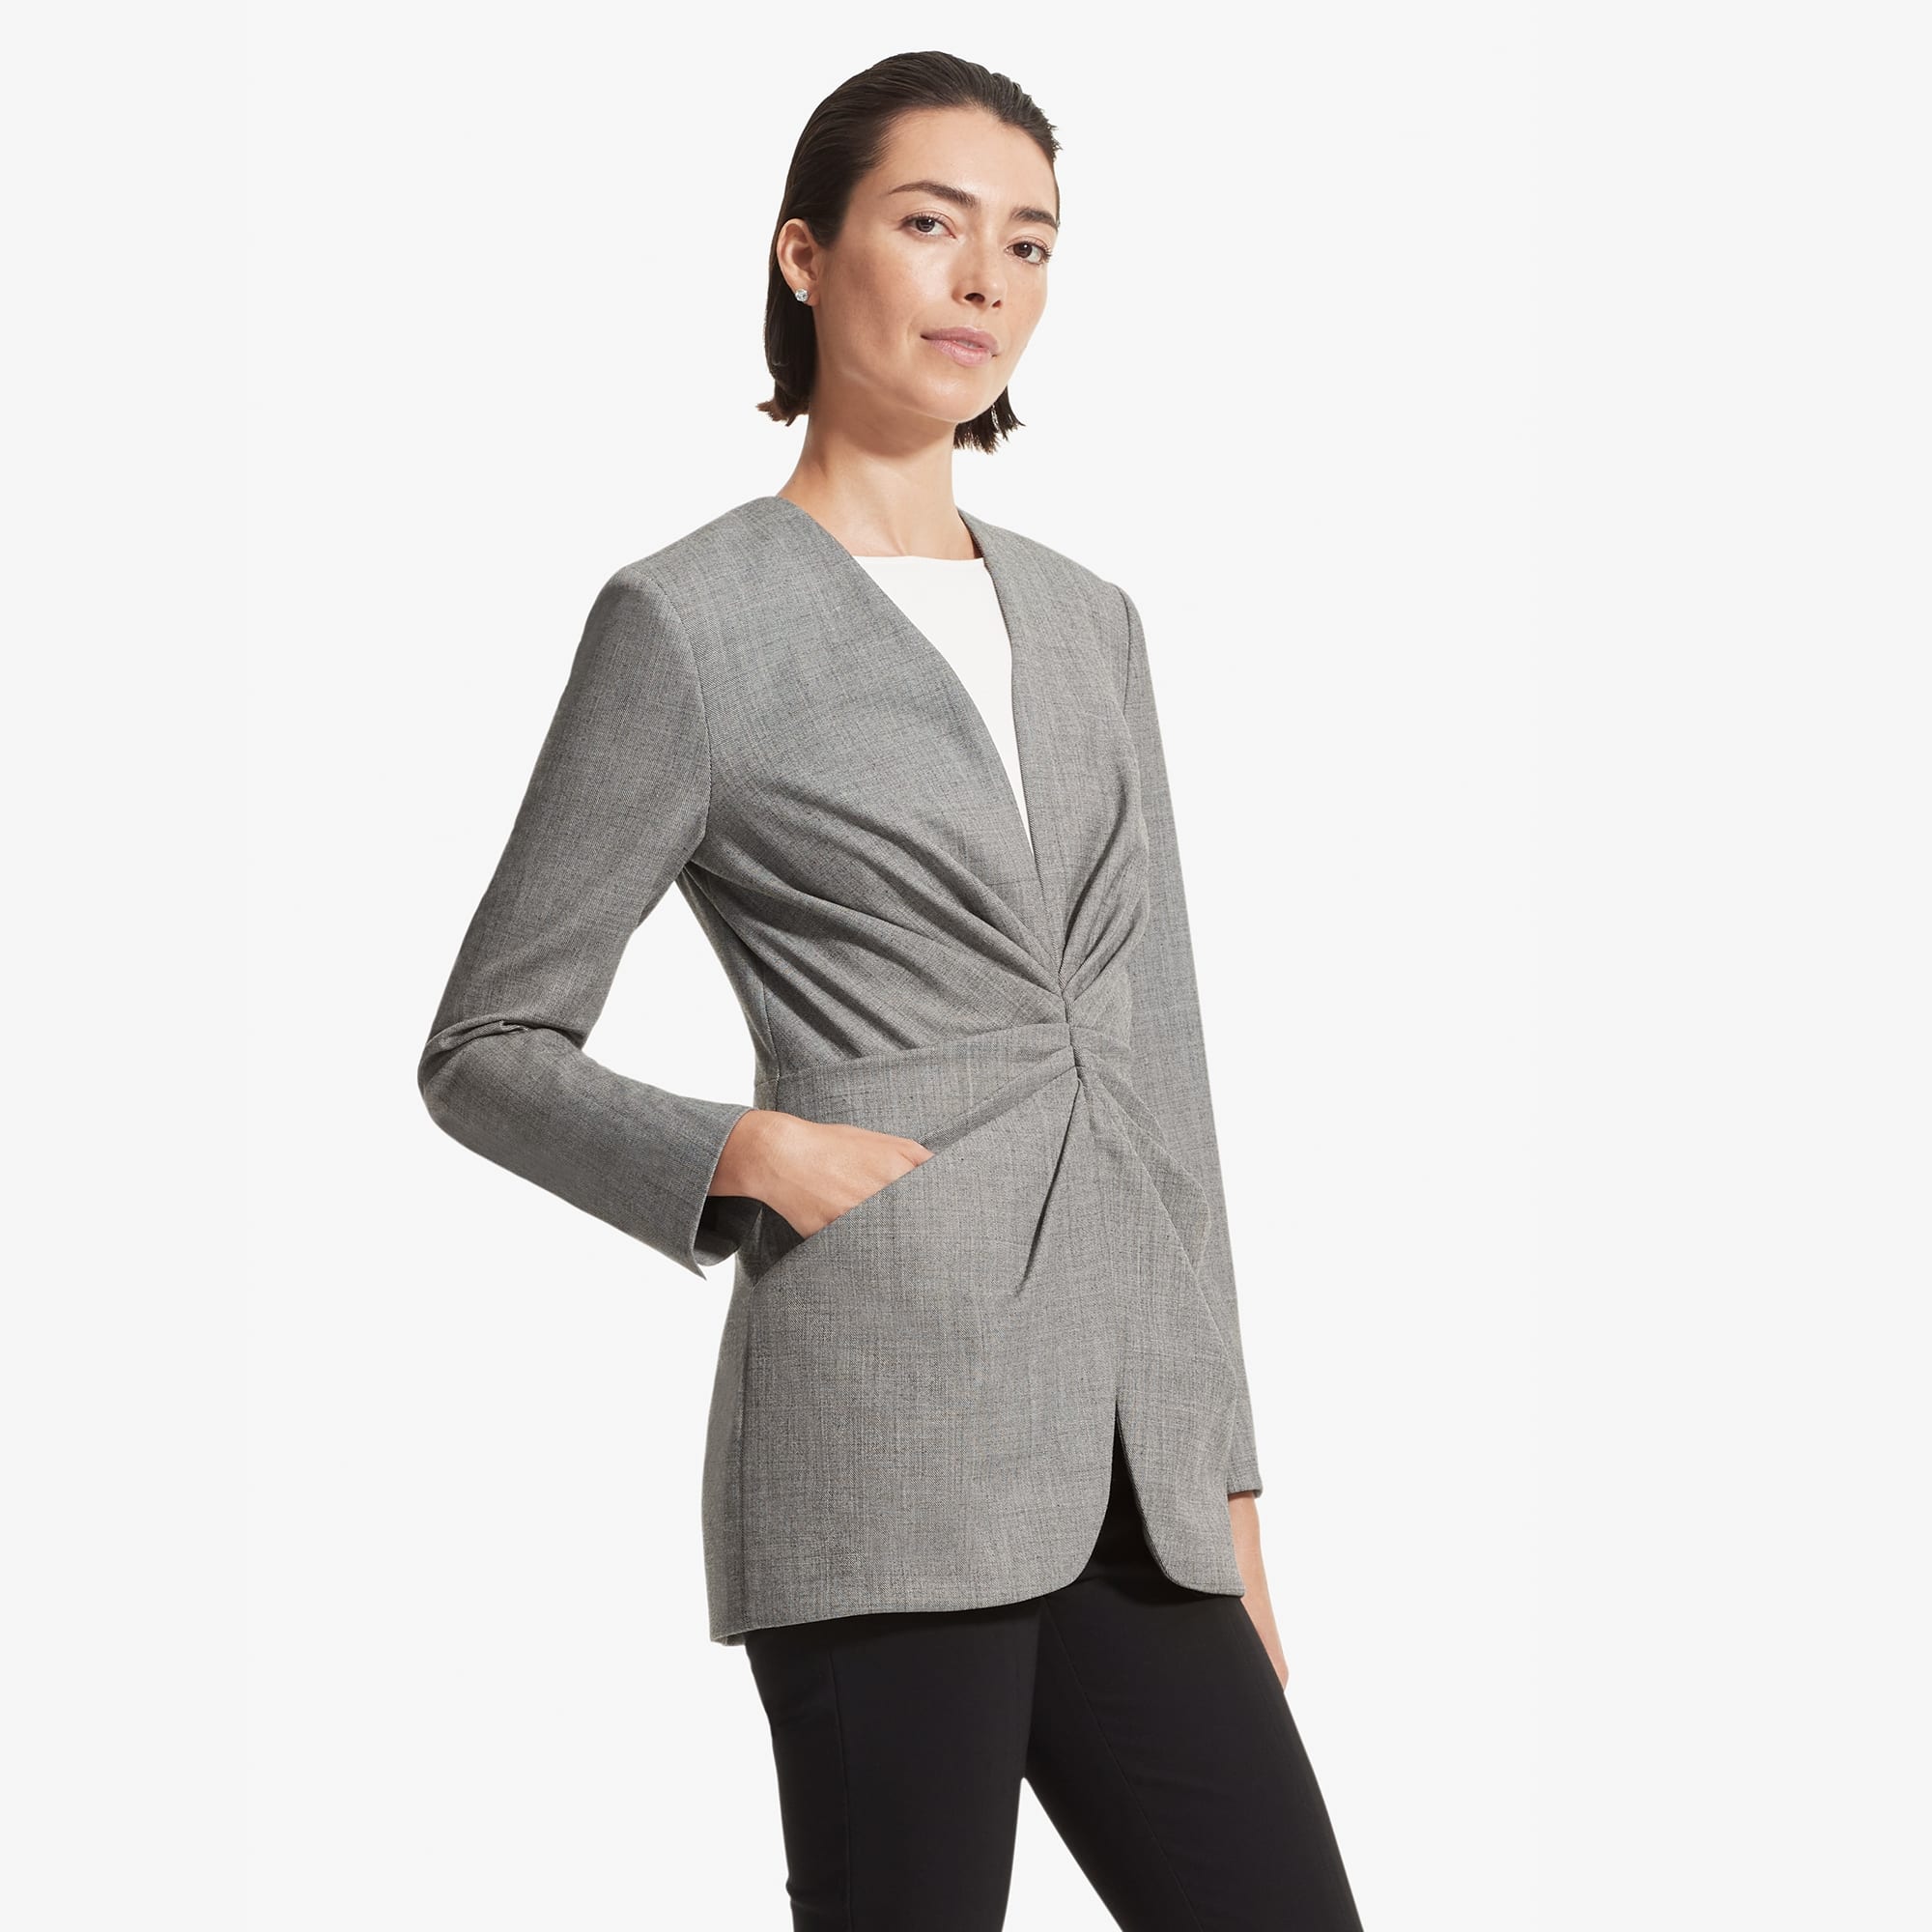 Side image of a woman standing wearing the Carmen jacket sharkskin in Black and white